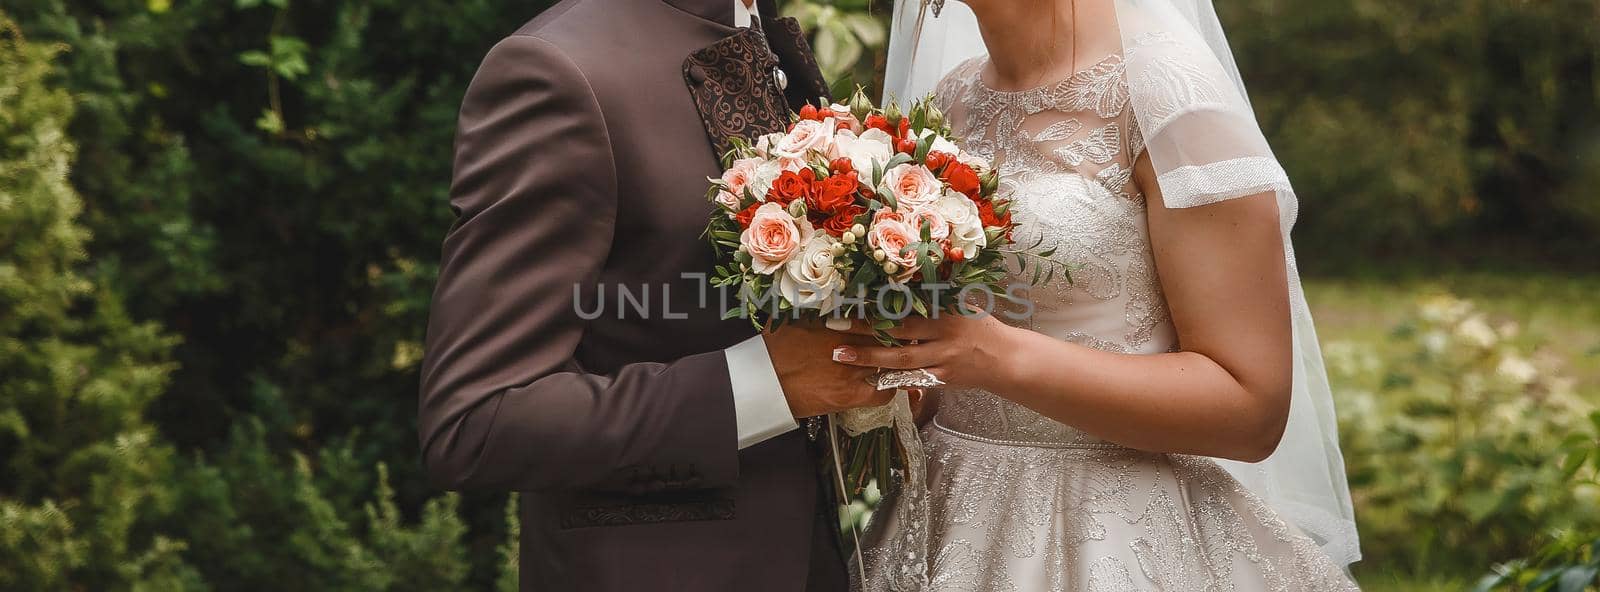 The bride and groom hold together with their hands a wedding bouquet of flowers by AYDO8